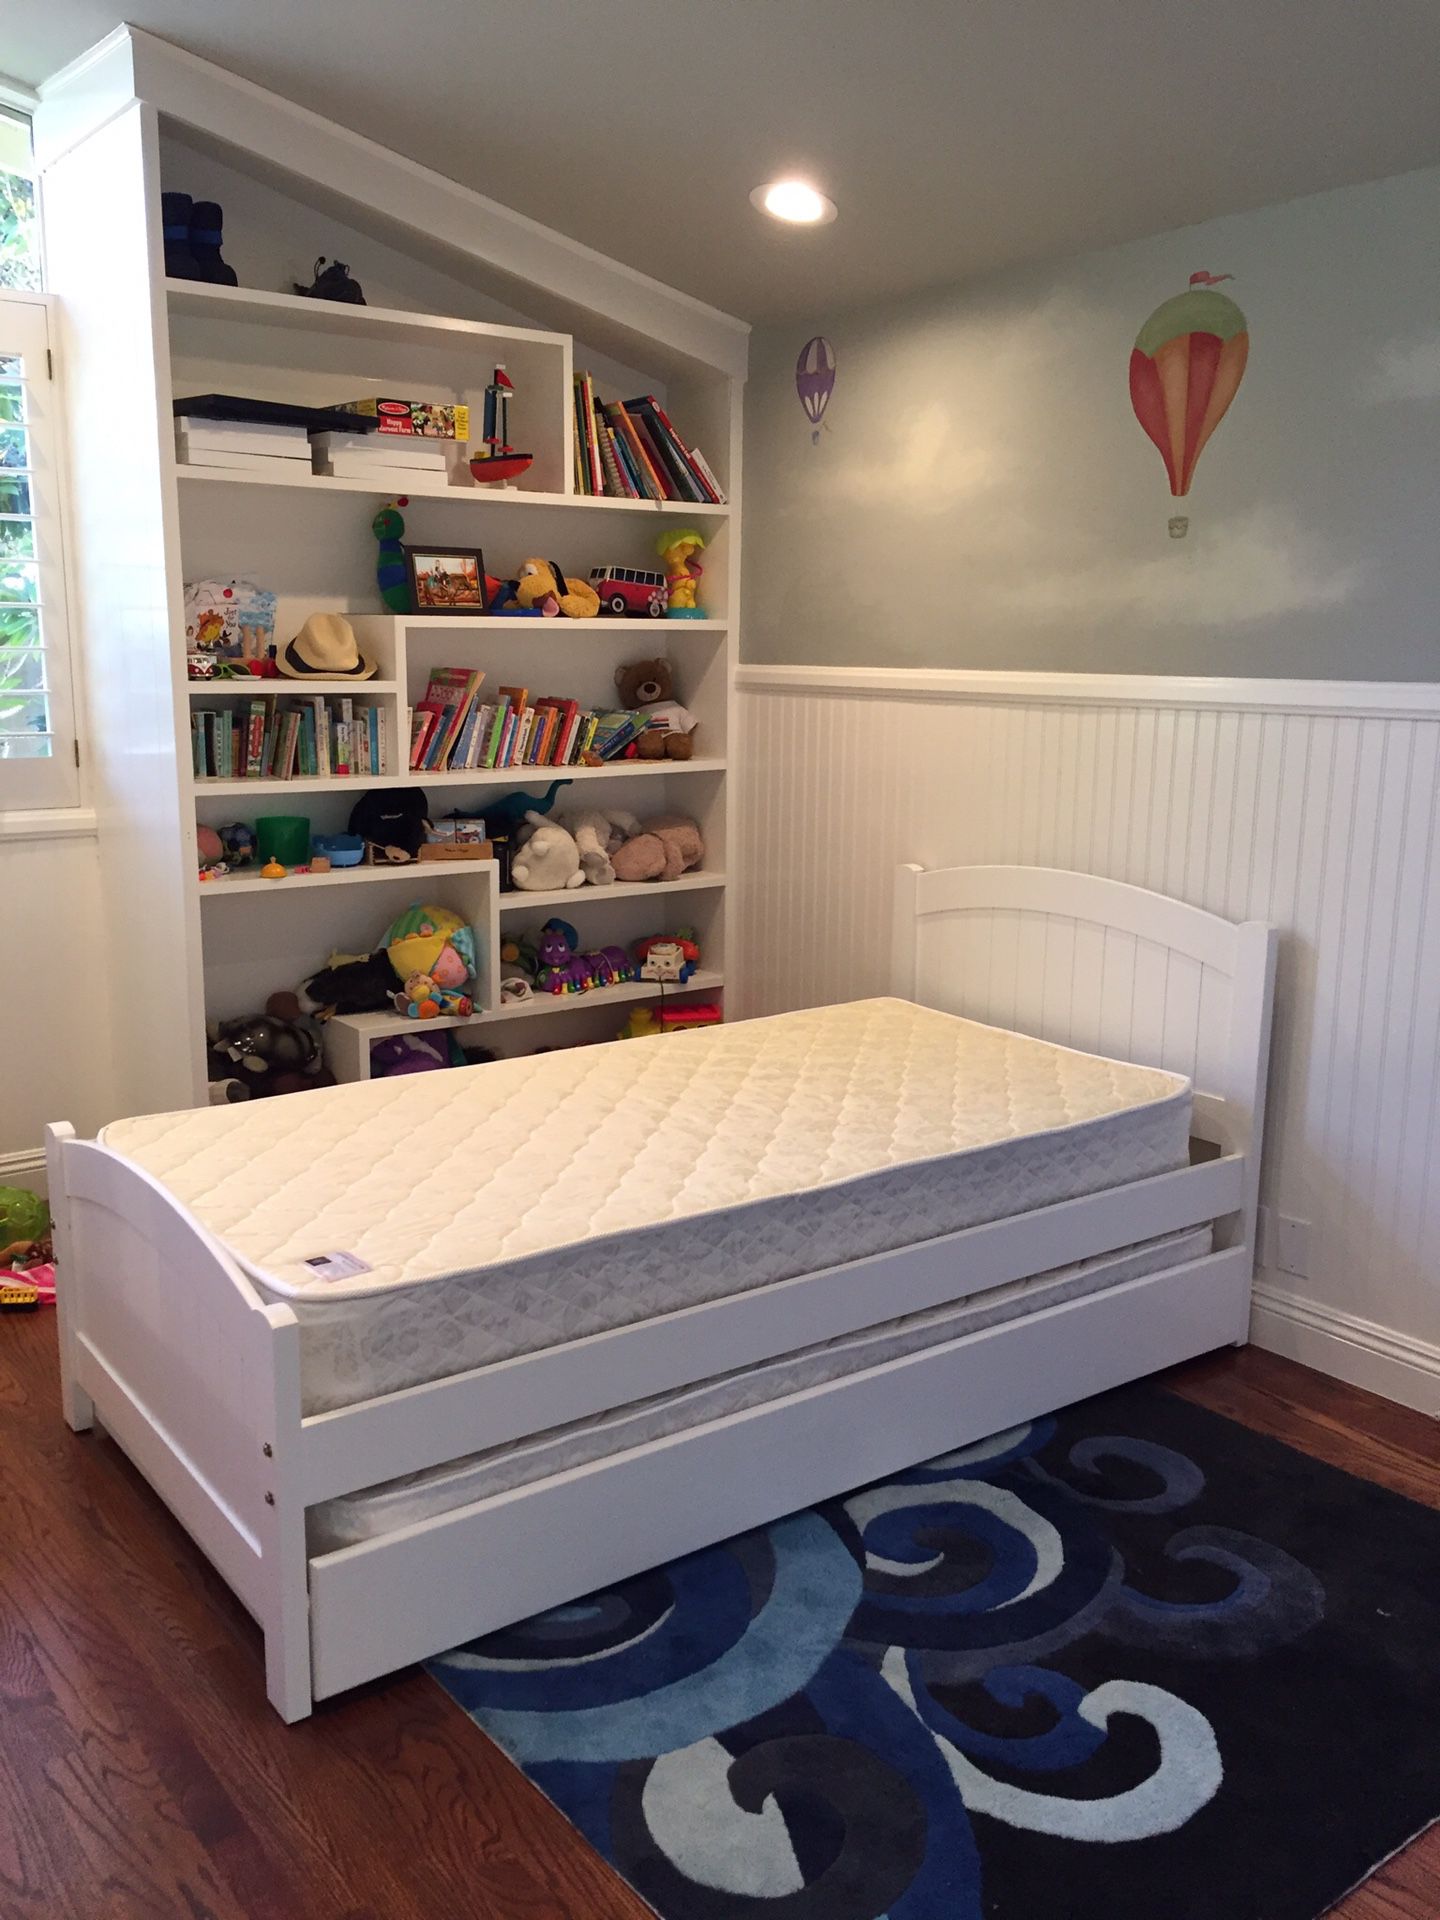 White Twin Bed w Trundle and Mattresses Brand New